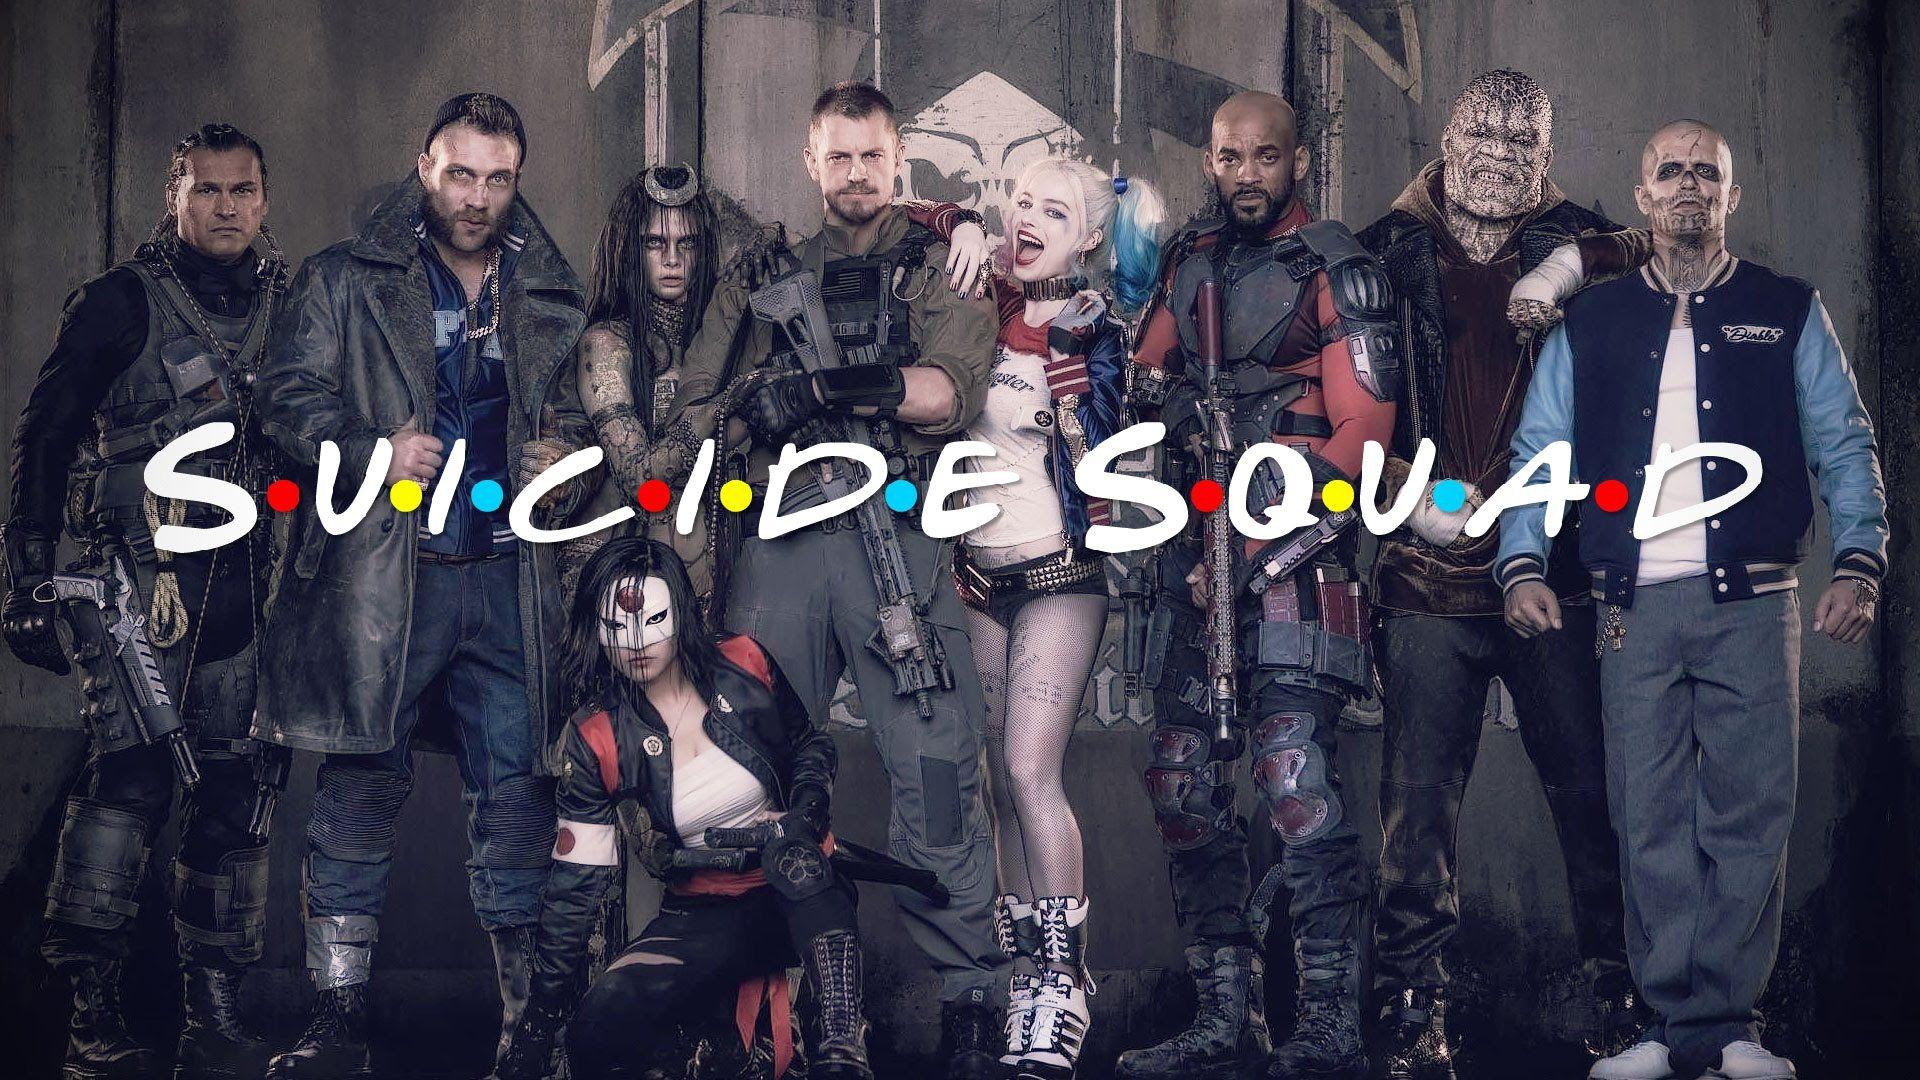 Suicide Squad 2016 HD wallpaper free download